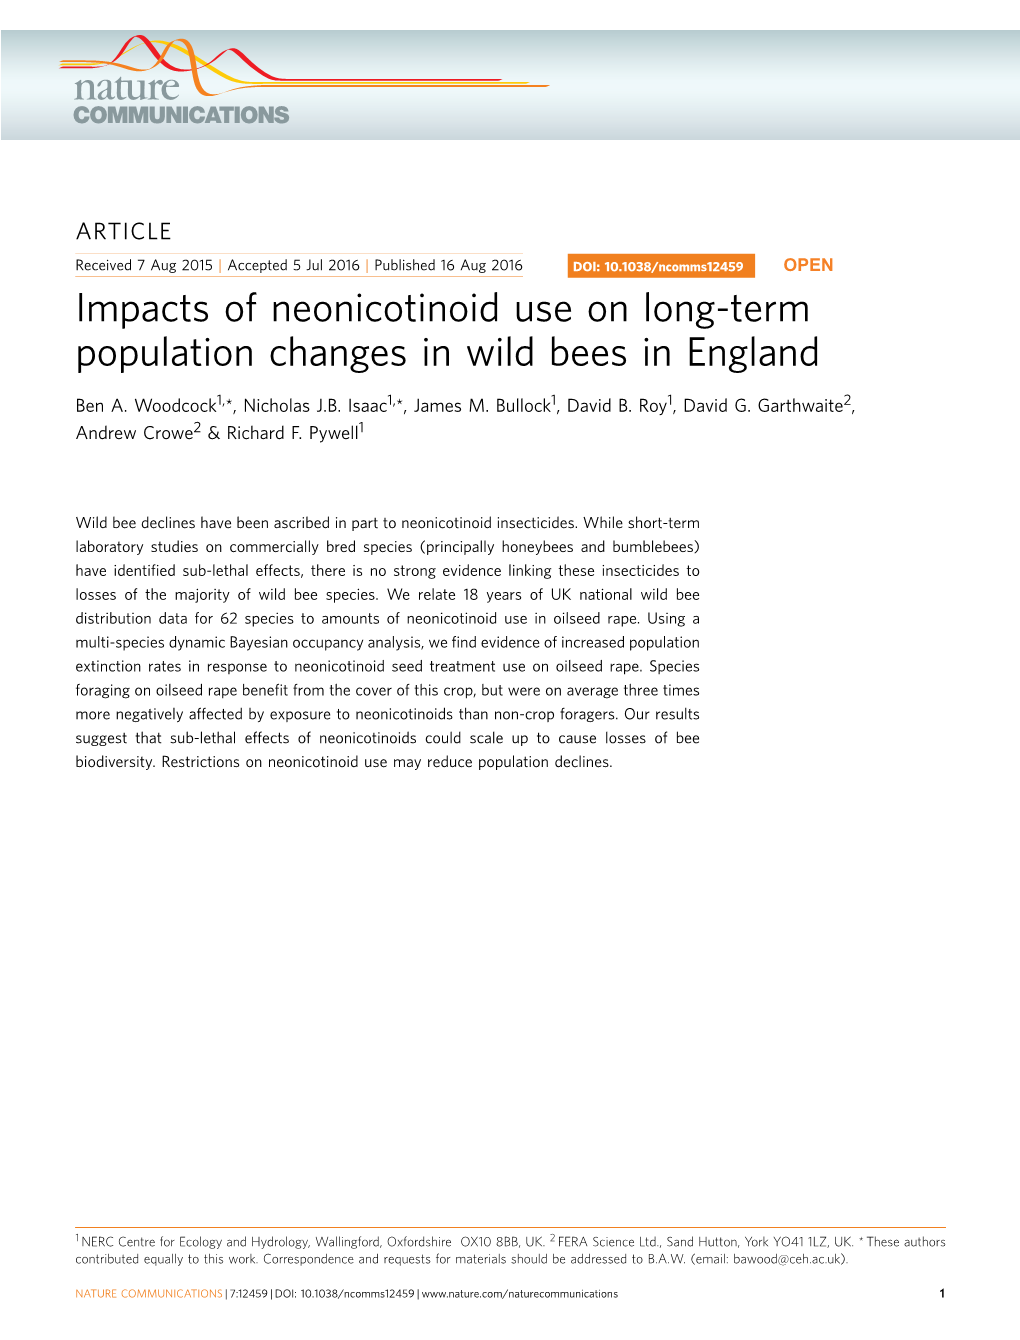 Impacts of Neonicotinoid Use on Long-Term Population Changes in Wild Bees in England